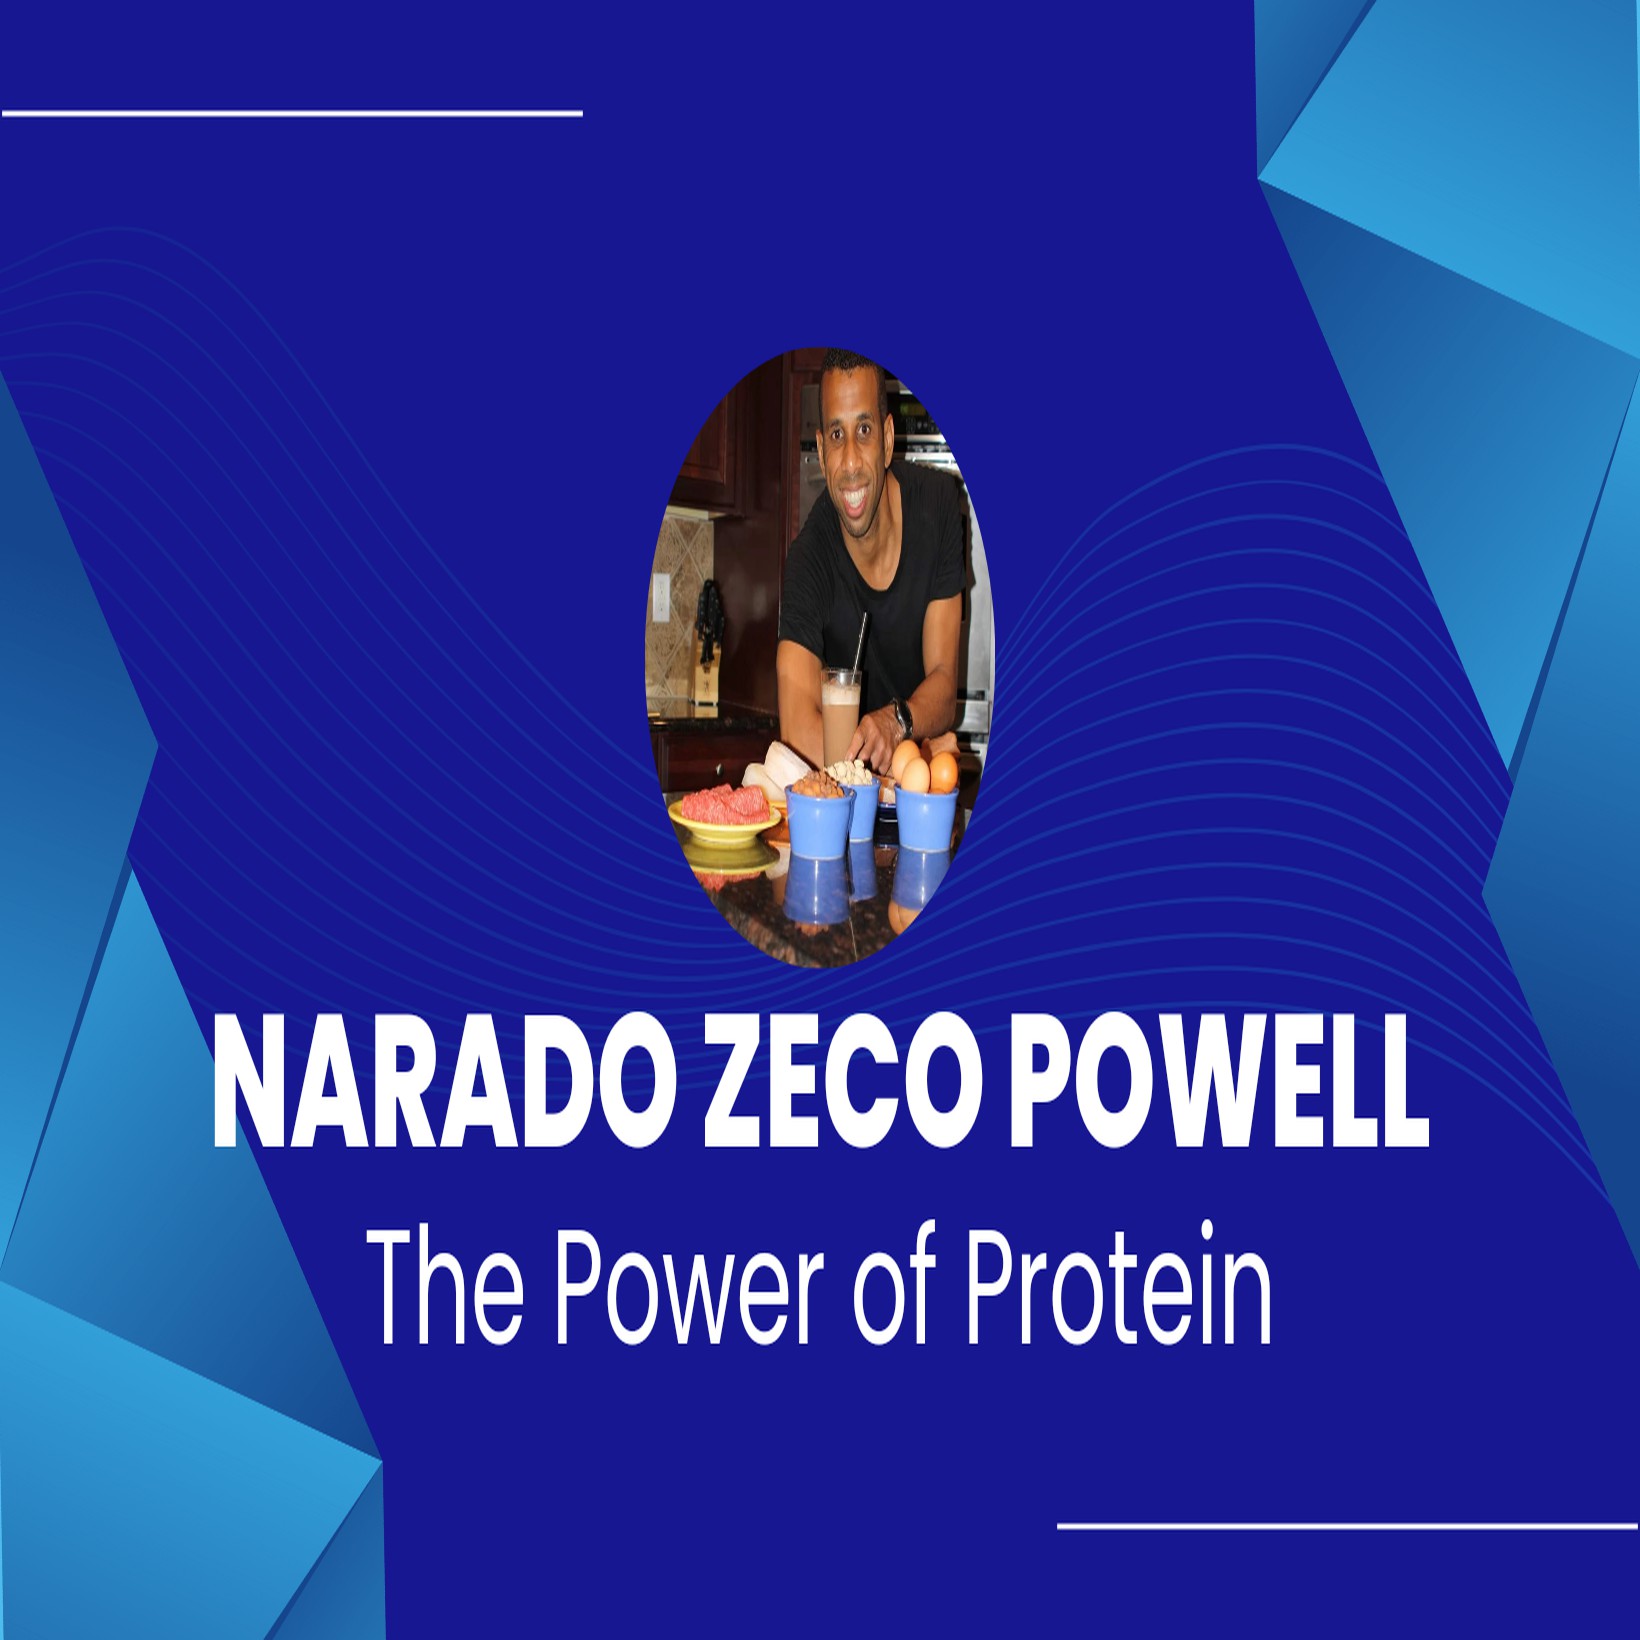 Harness the Power of Protein for Increased Metabolism, Appetite Regulation, and Lean Muscle Preservation!